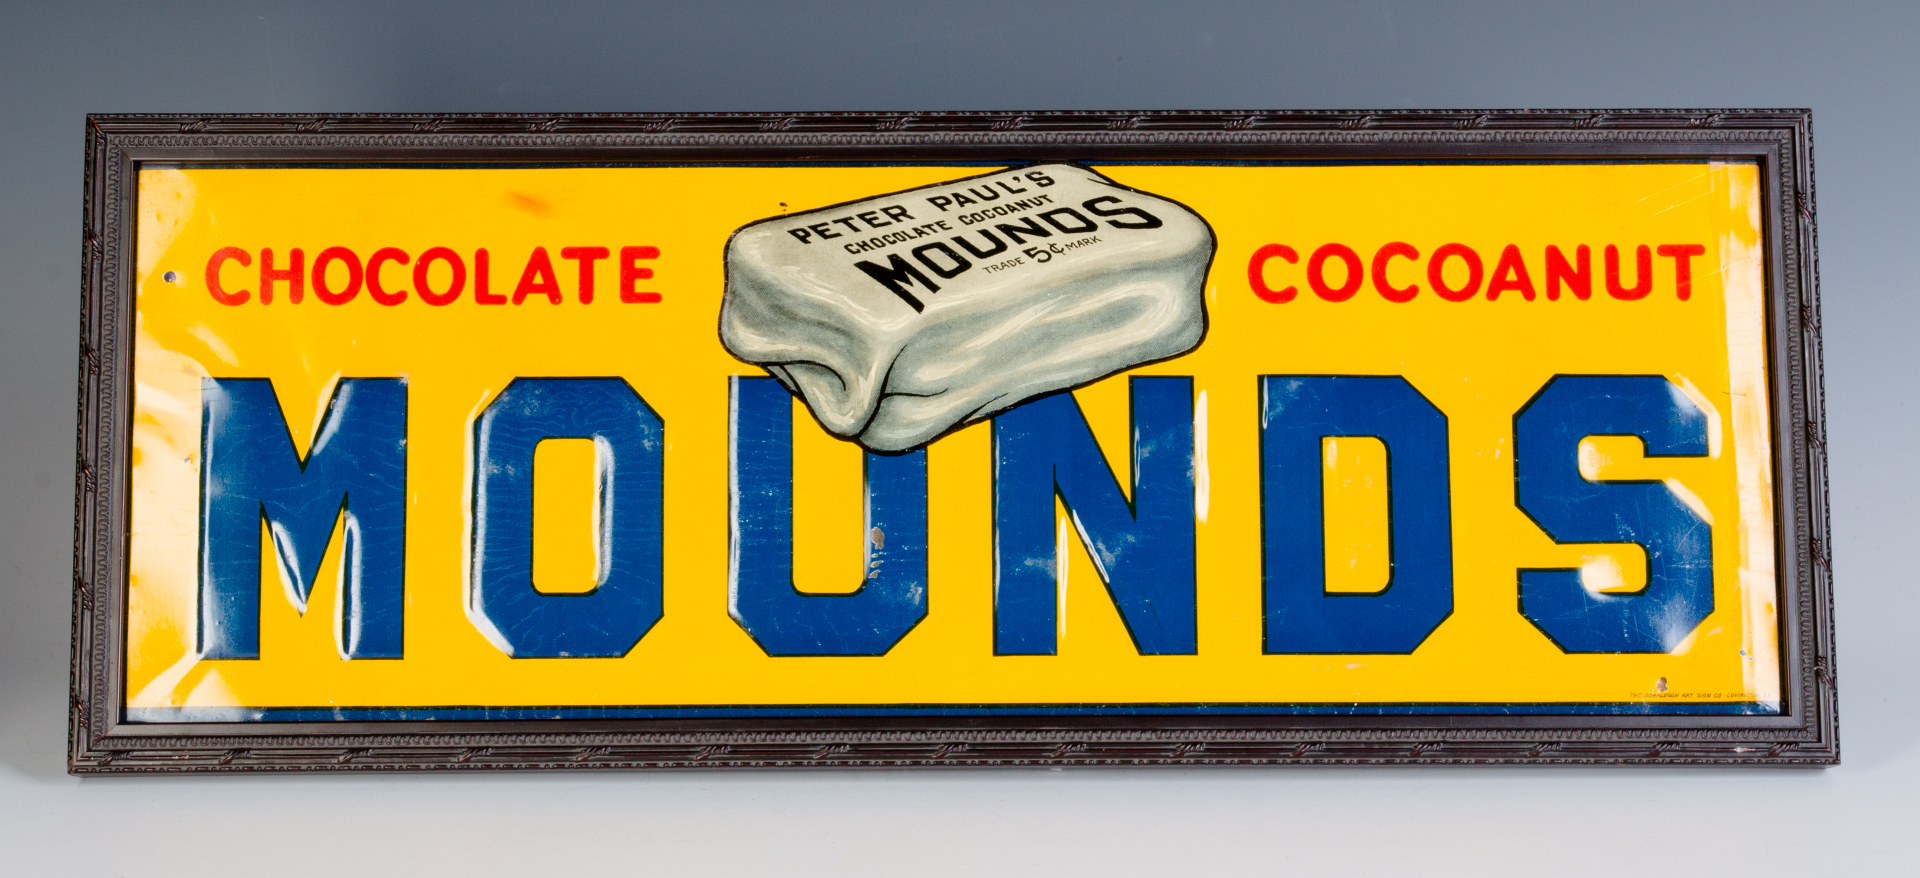 AN EMBOSSED TIN SIGN ADVERTISING MOUNDS CANDY BAR